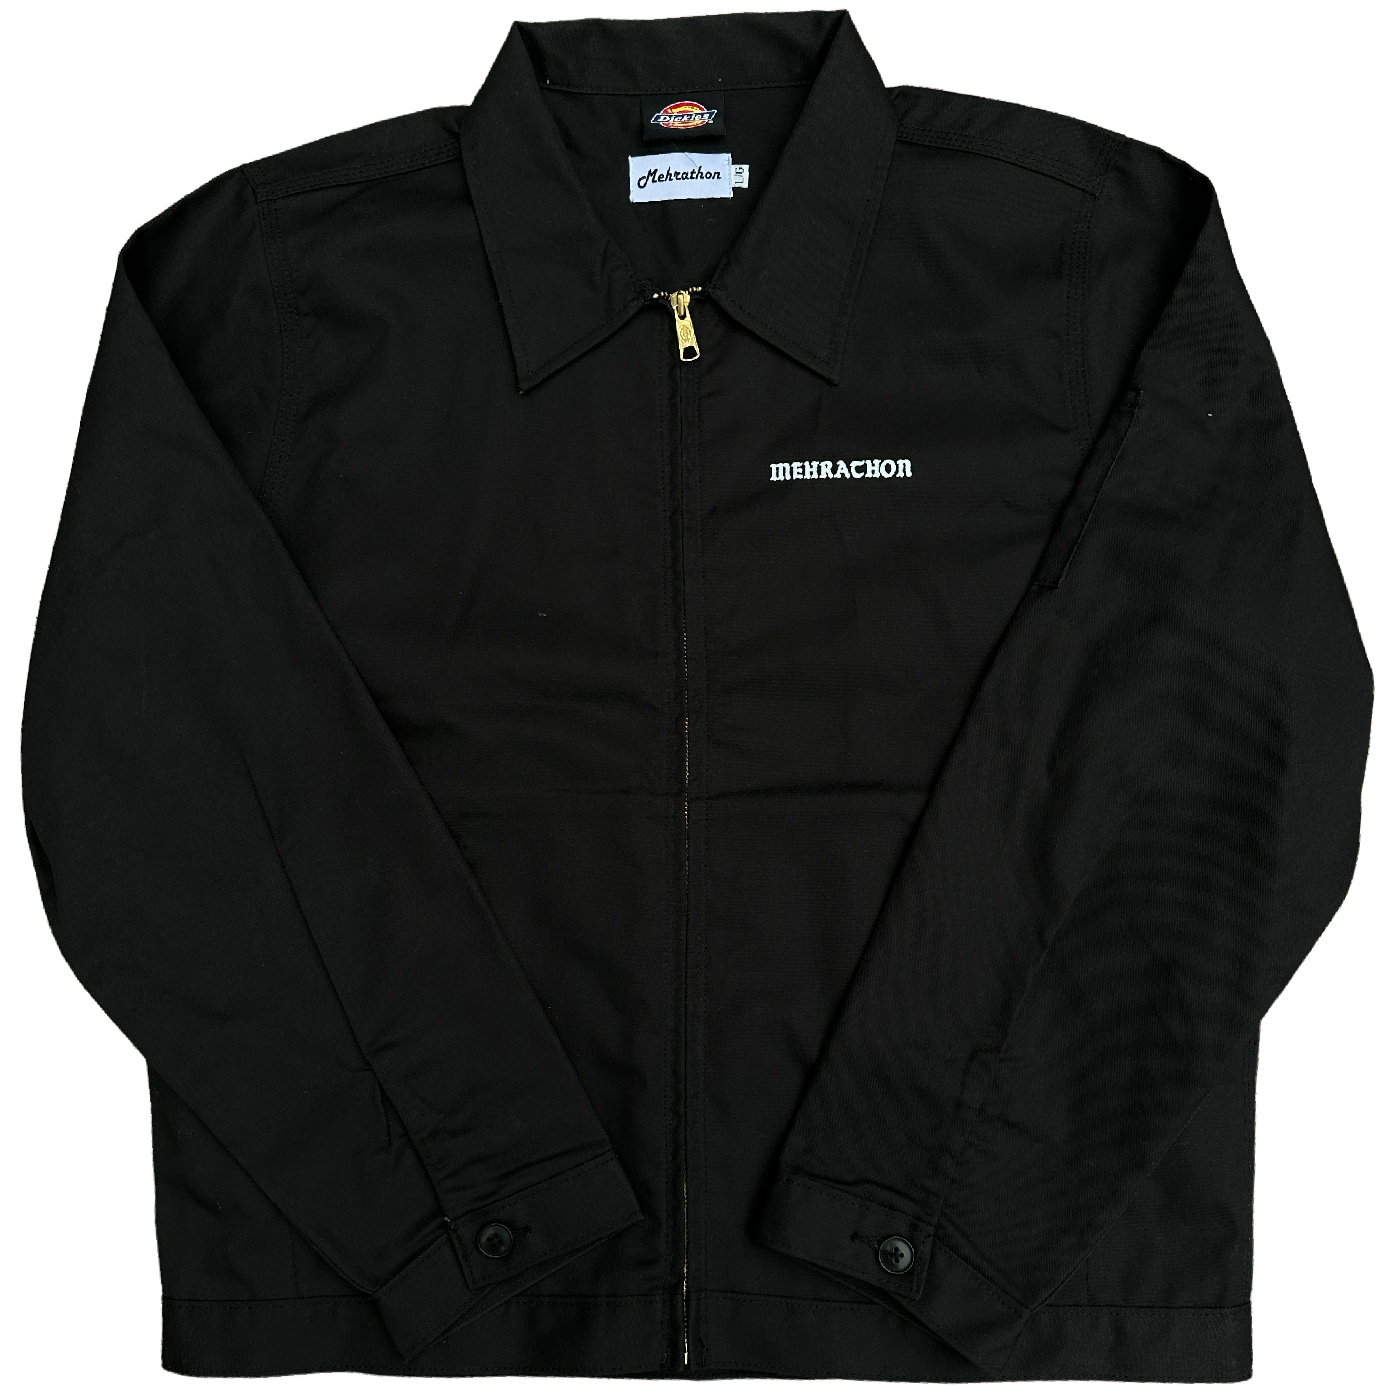 World Famous Dickies Jacket